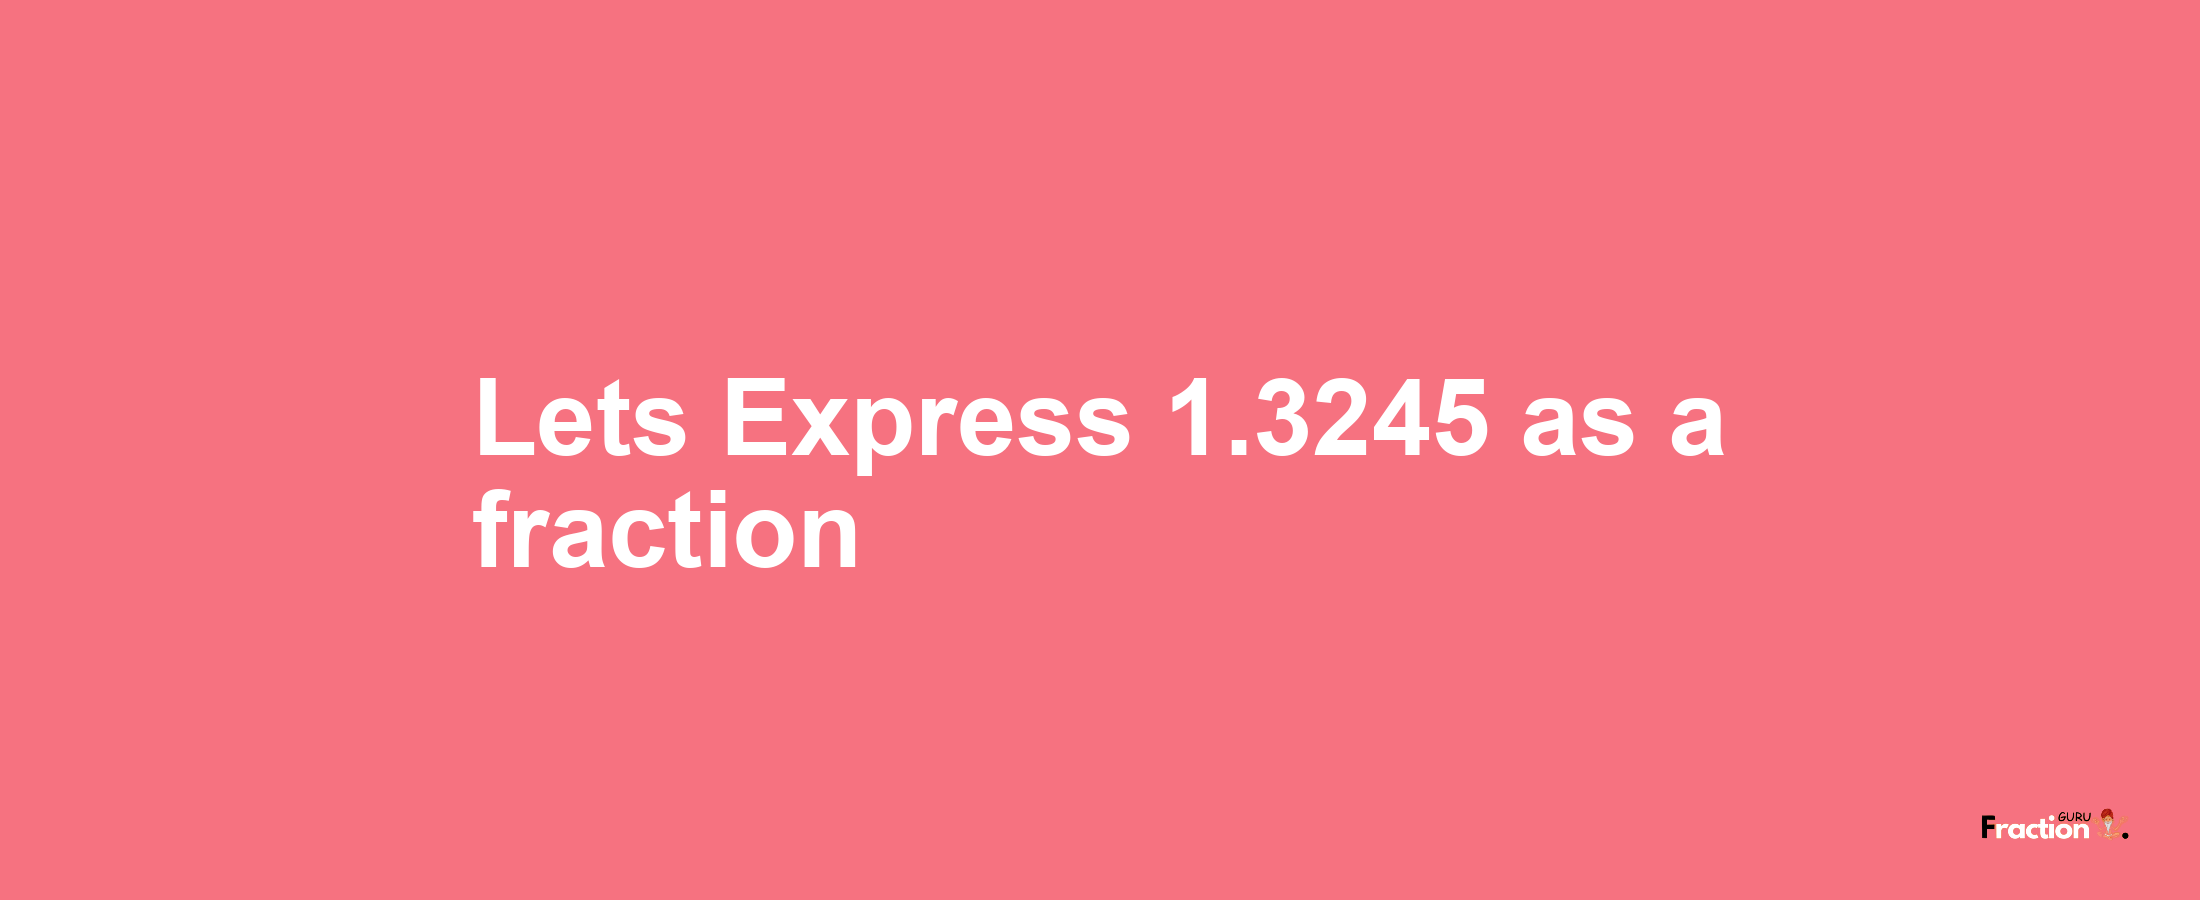 Lets Express 1.3245 as afraction